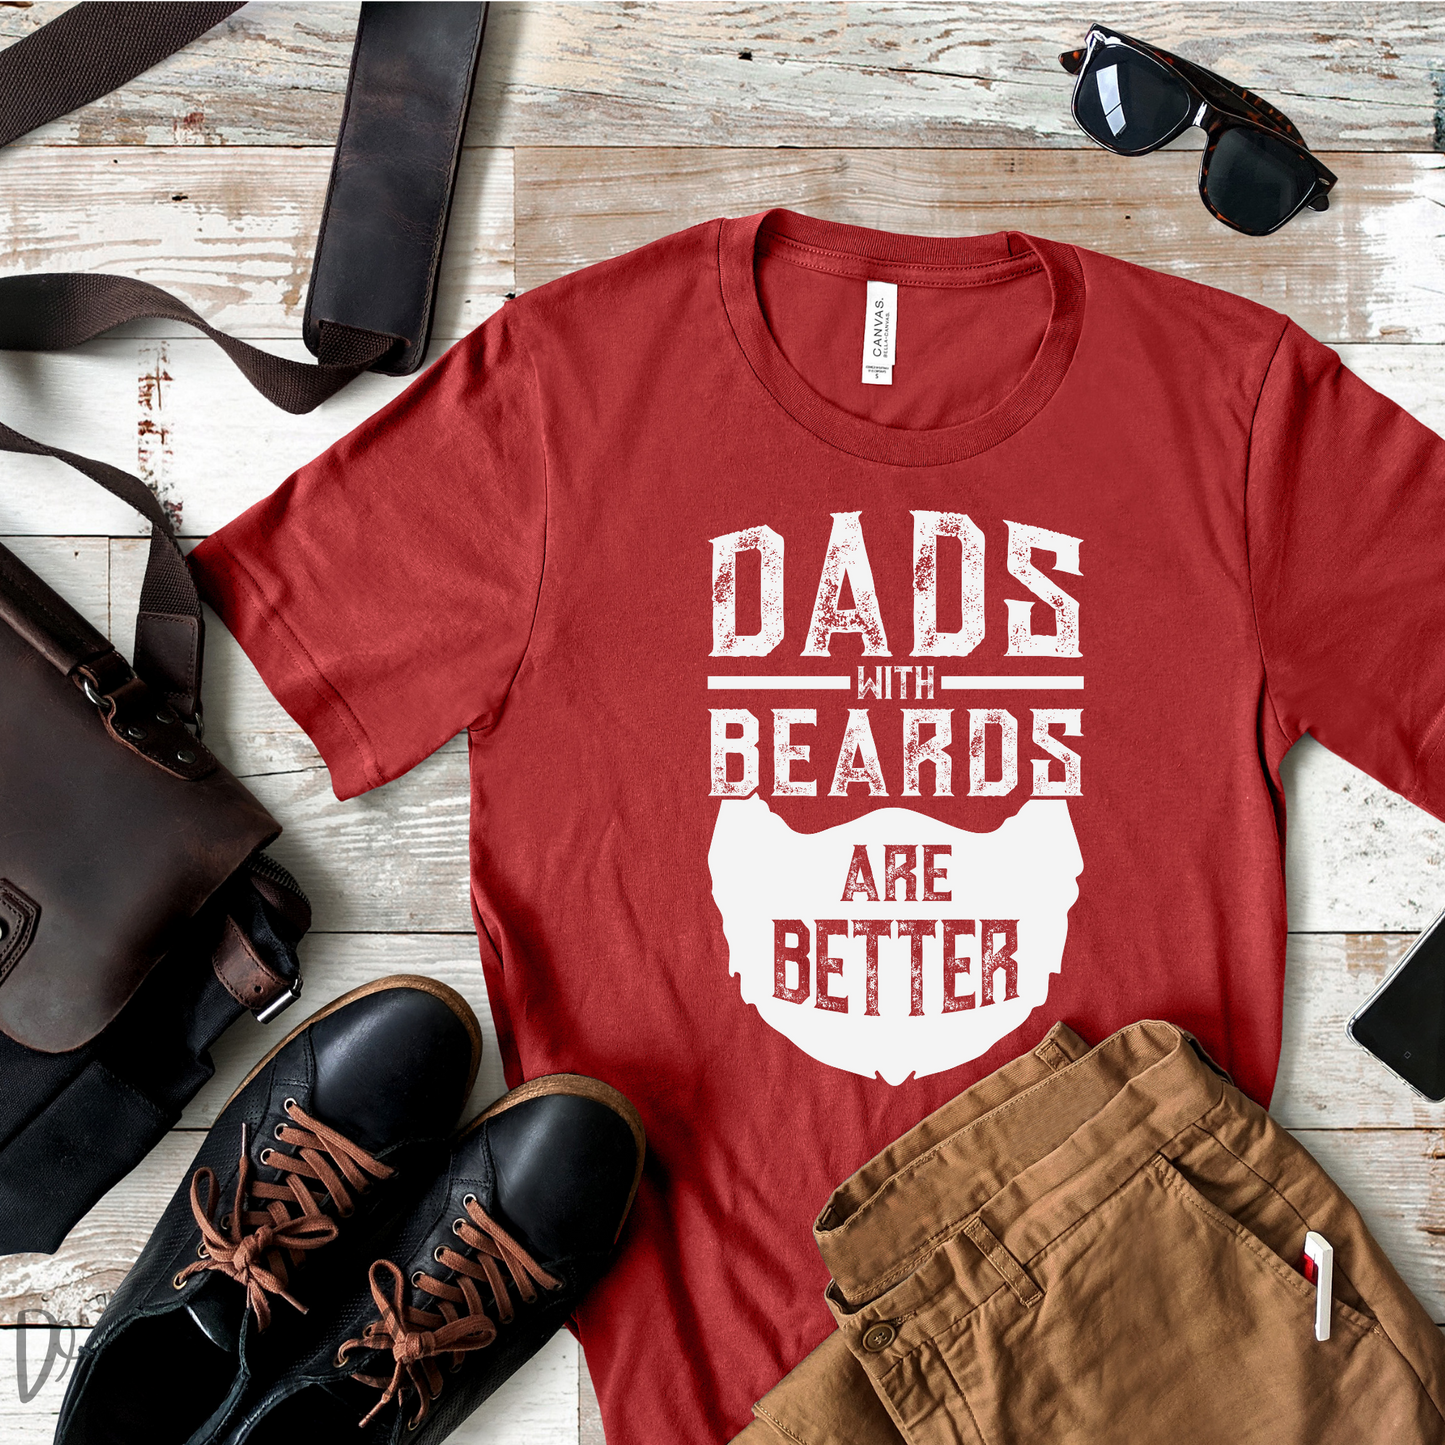 The Dads With Beards Tee